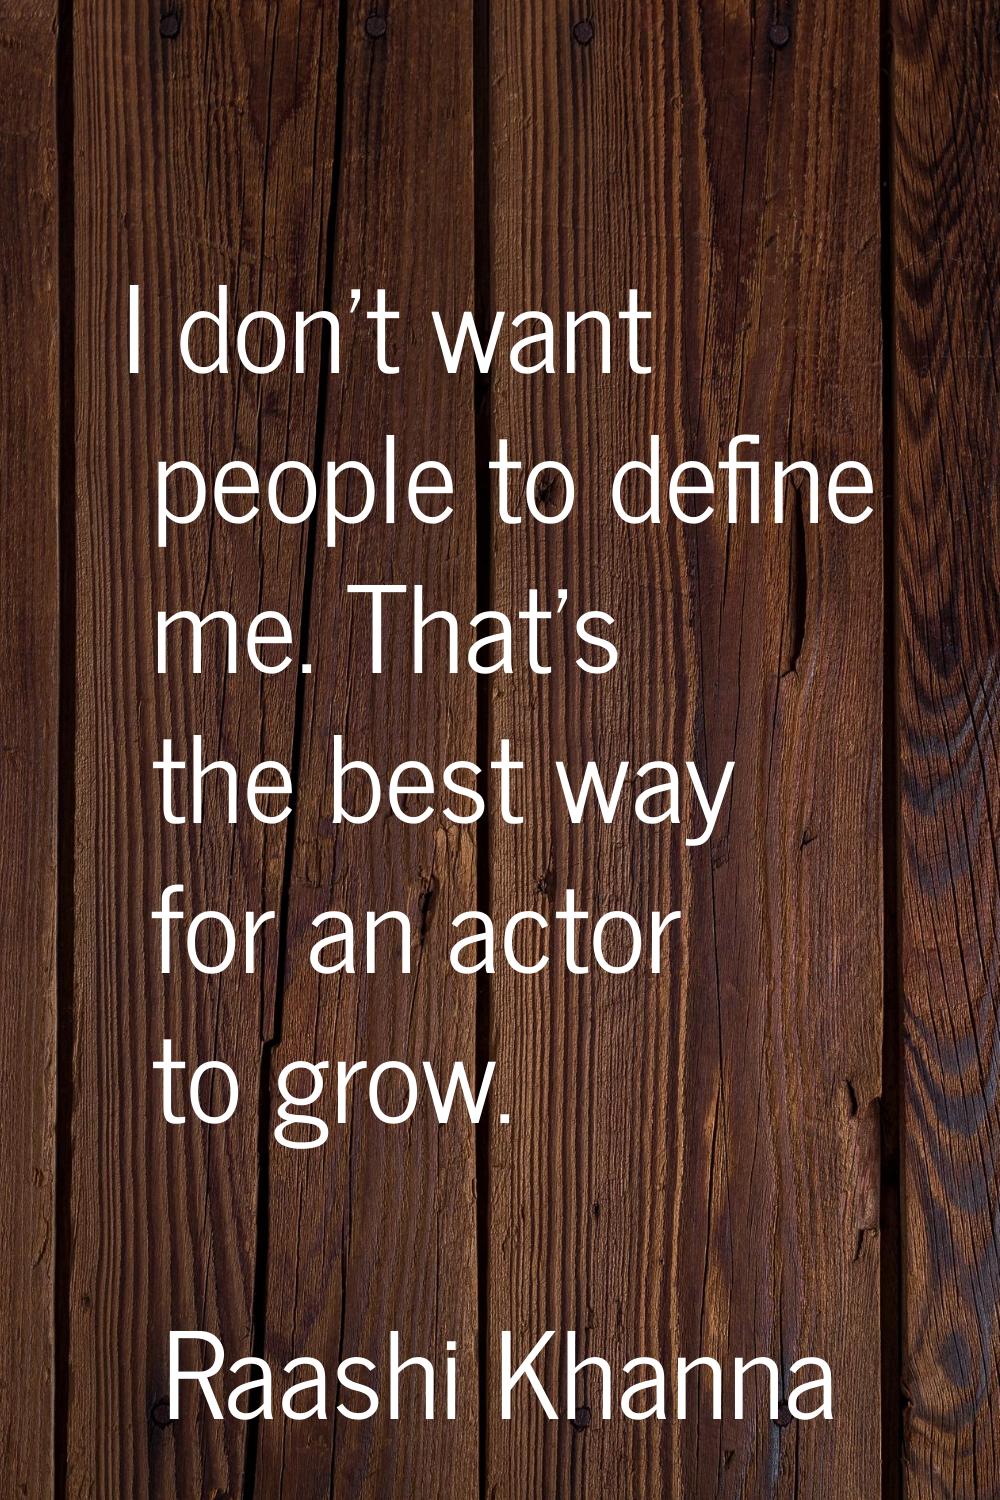 I don't want people to define me. That's the best way for an actor to grow.